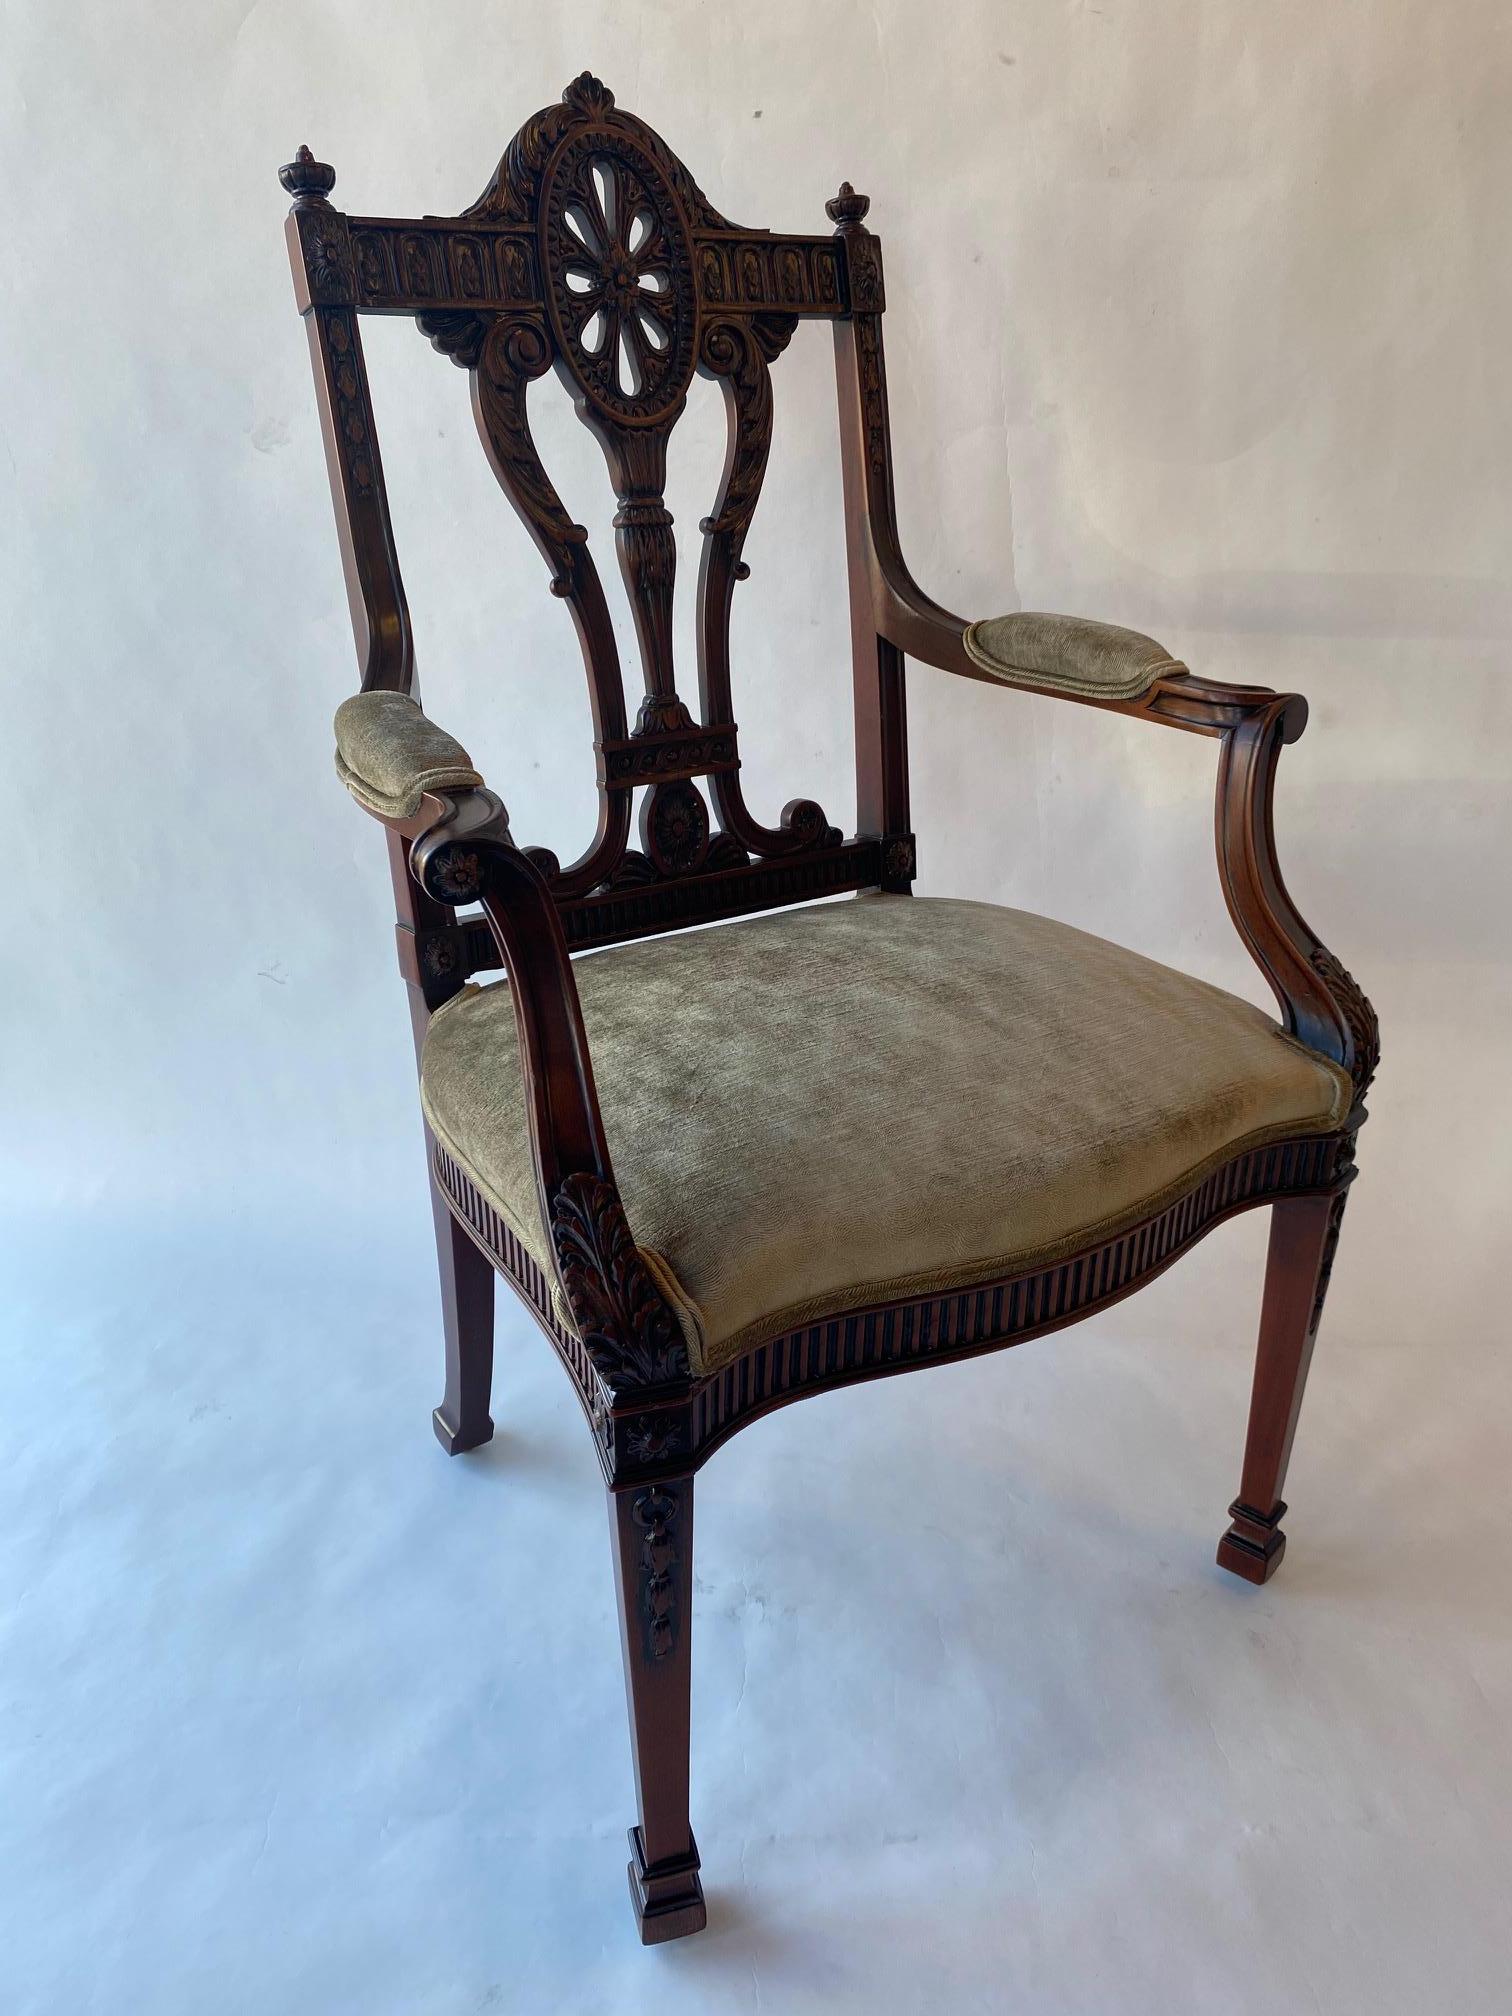 Set of Twelve 19th Century English Edwardian Mahogany Dining Chairs. Consisting of two armchairs and ten side chairs, highly carved, in the manner of Robert Adam (1728-1792).
Arm Chairs 25